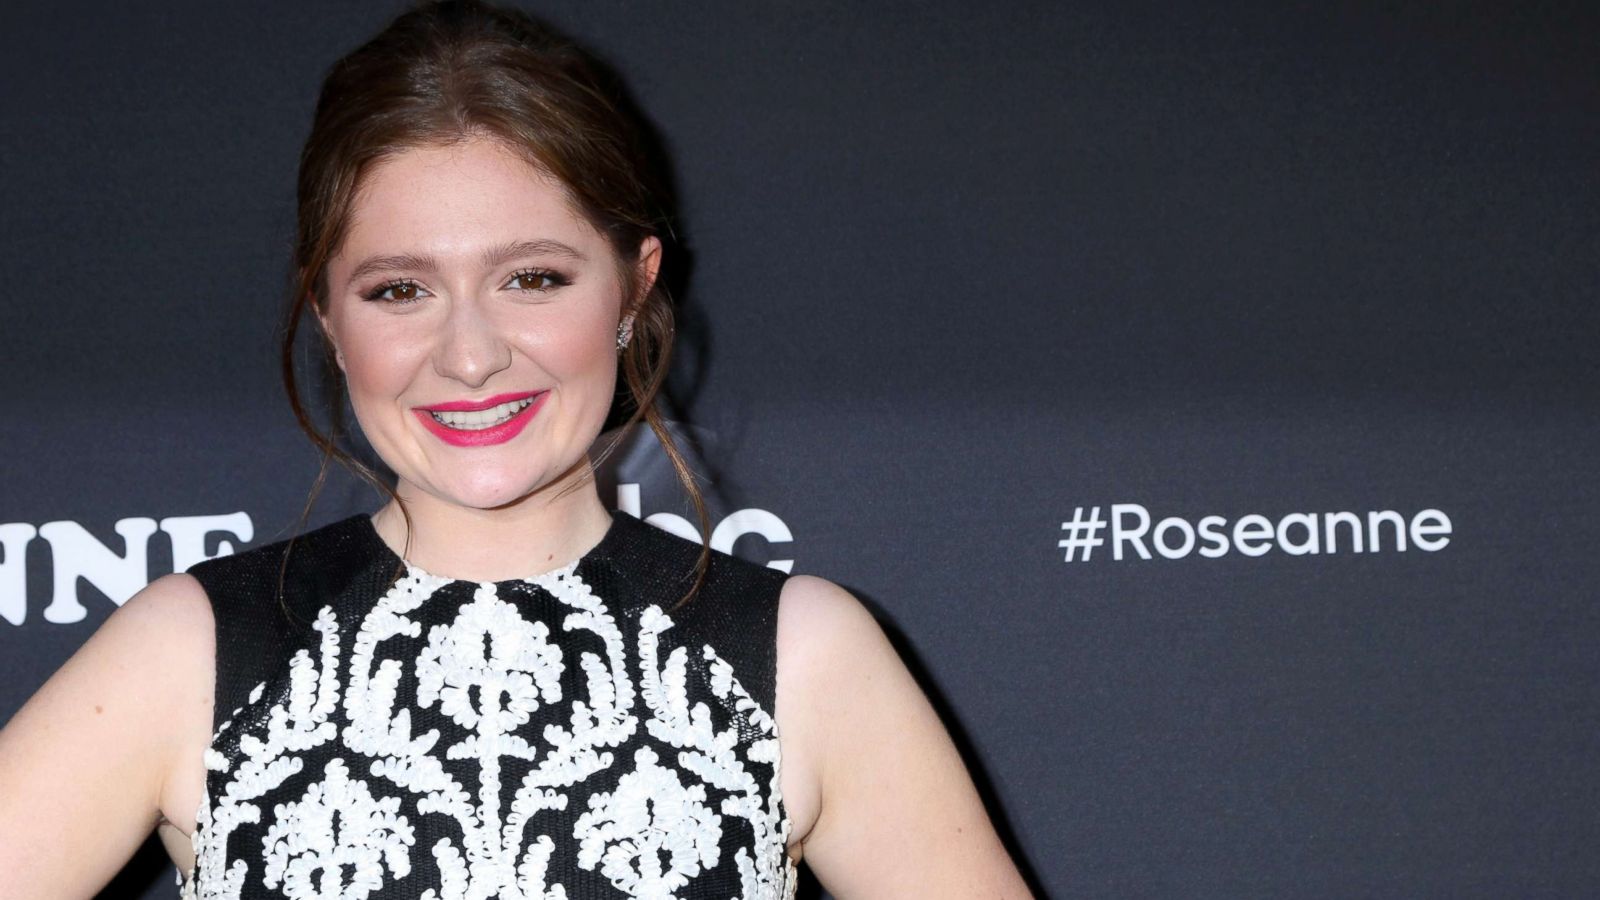 Roseanne' star Emma Kenney enters treatment for 'doing things I should not be doing' - ABC News